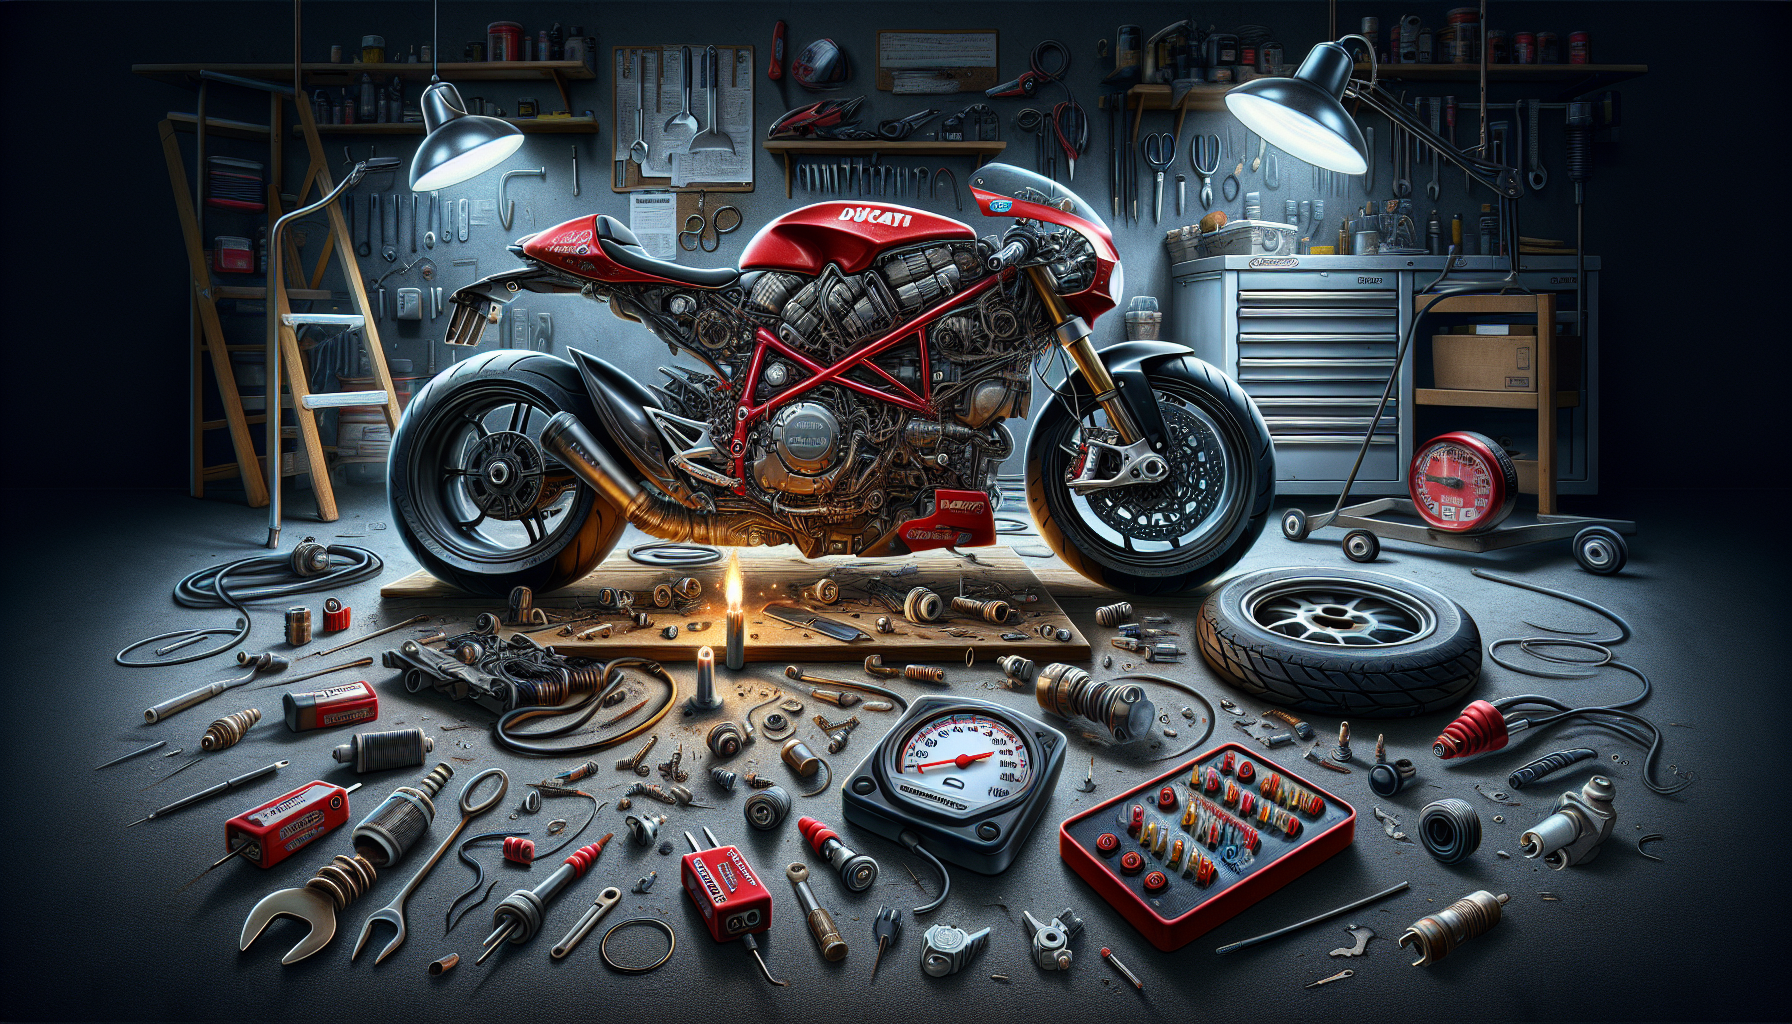 Common Problems to Look Out for in Ducati Motorcycles